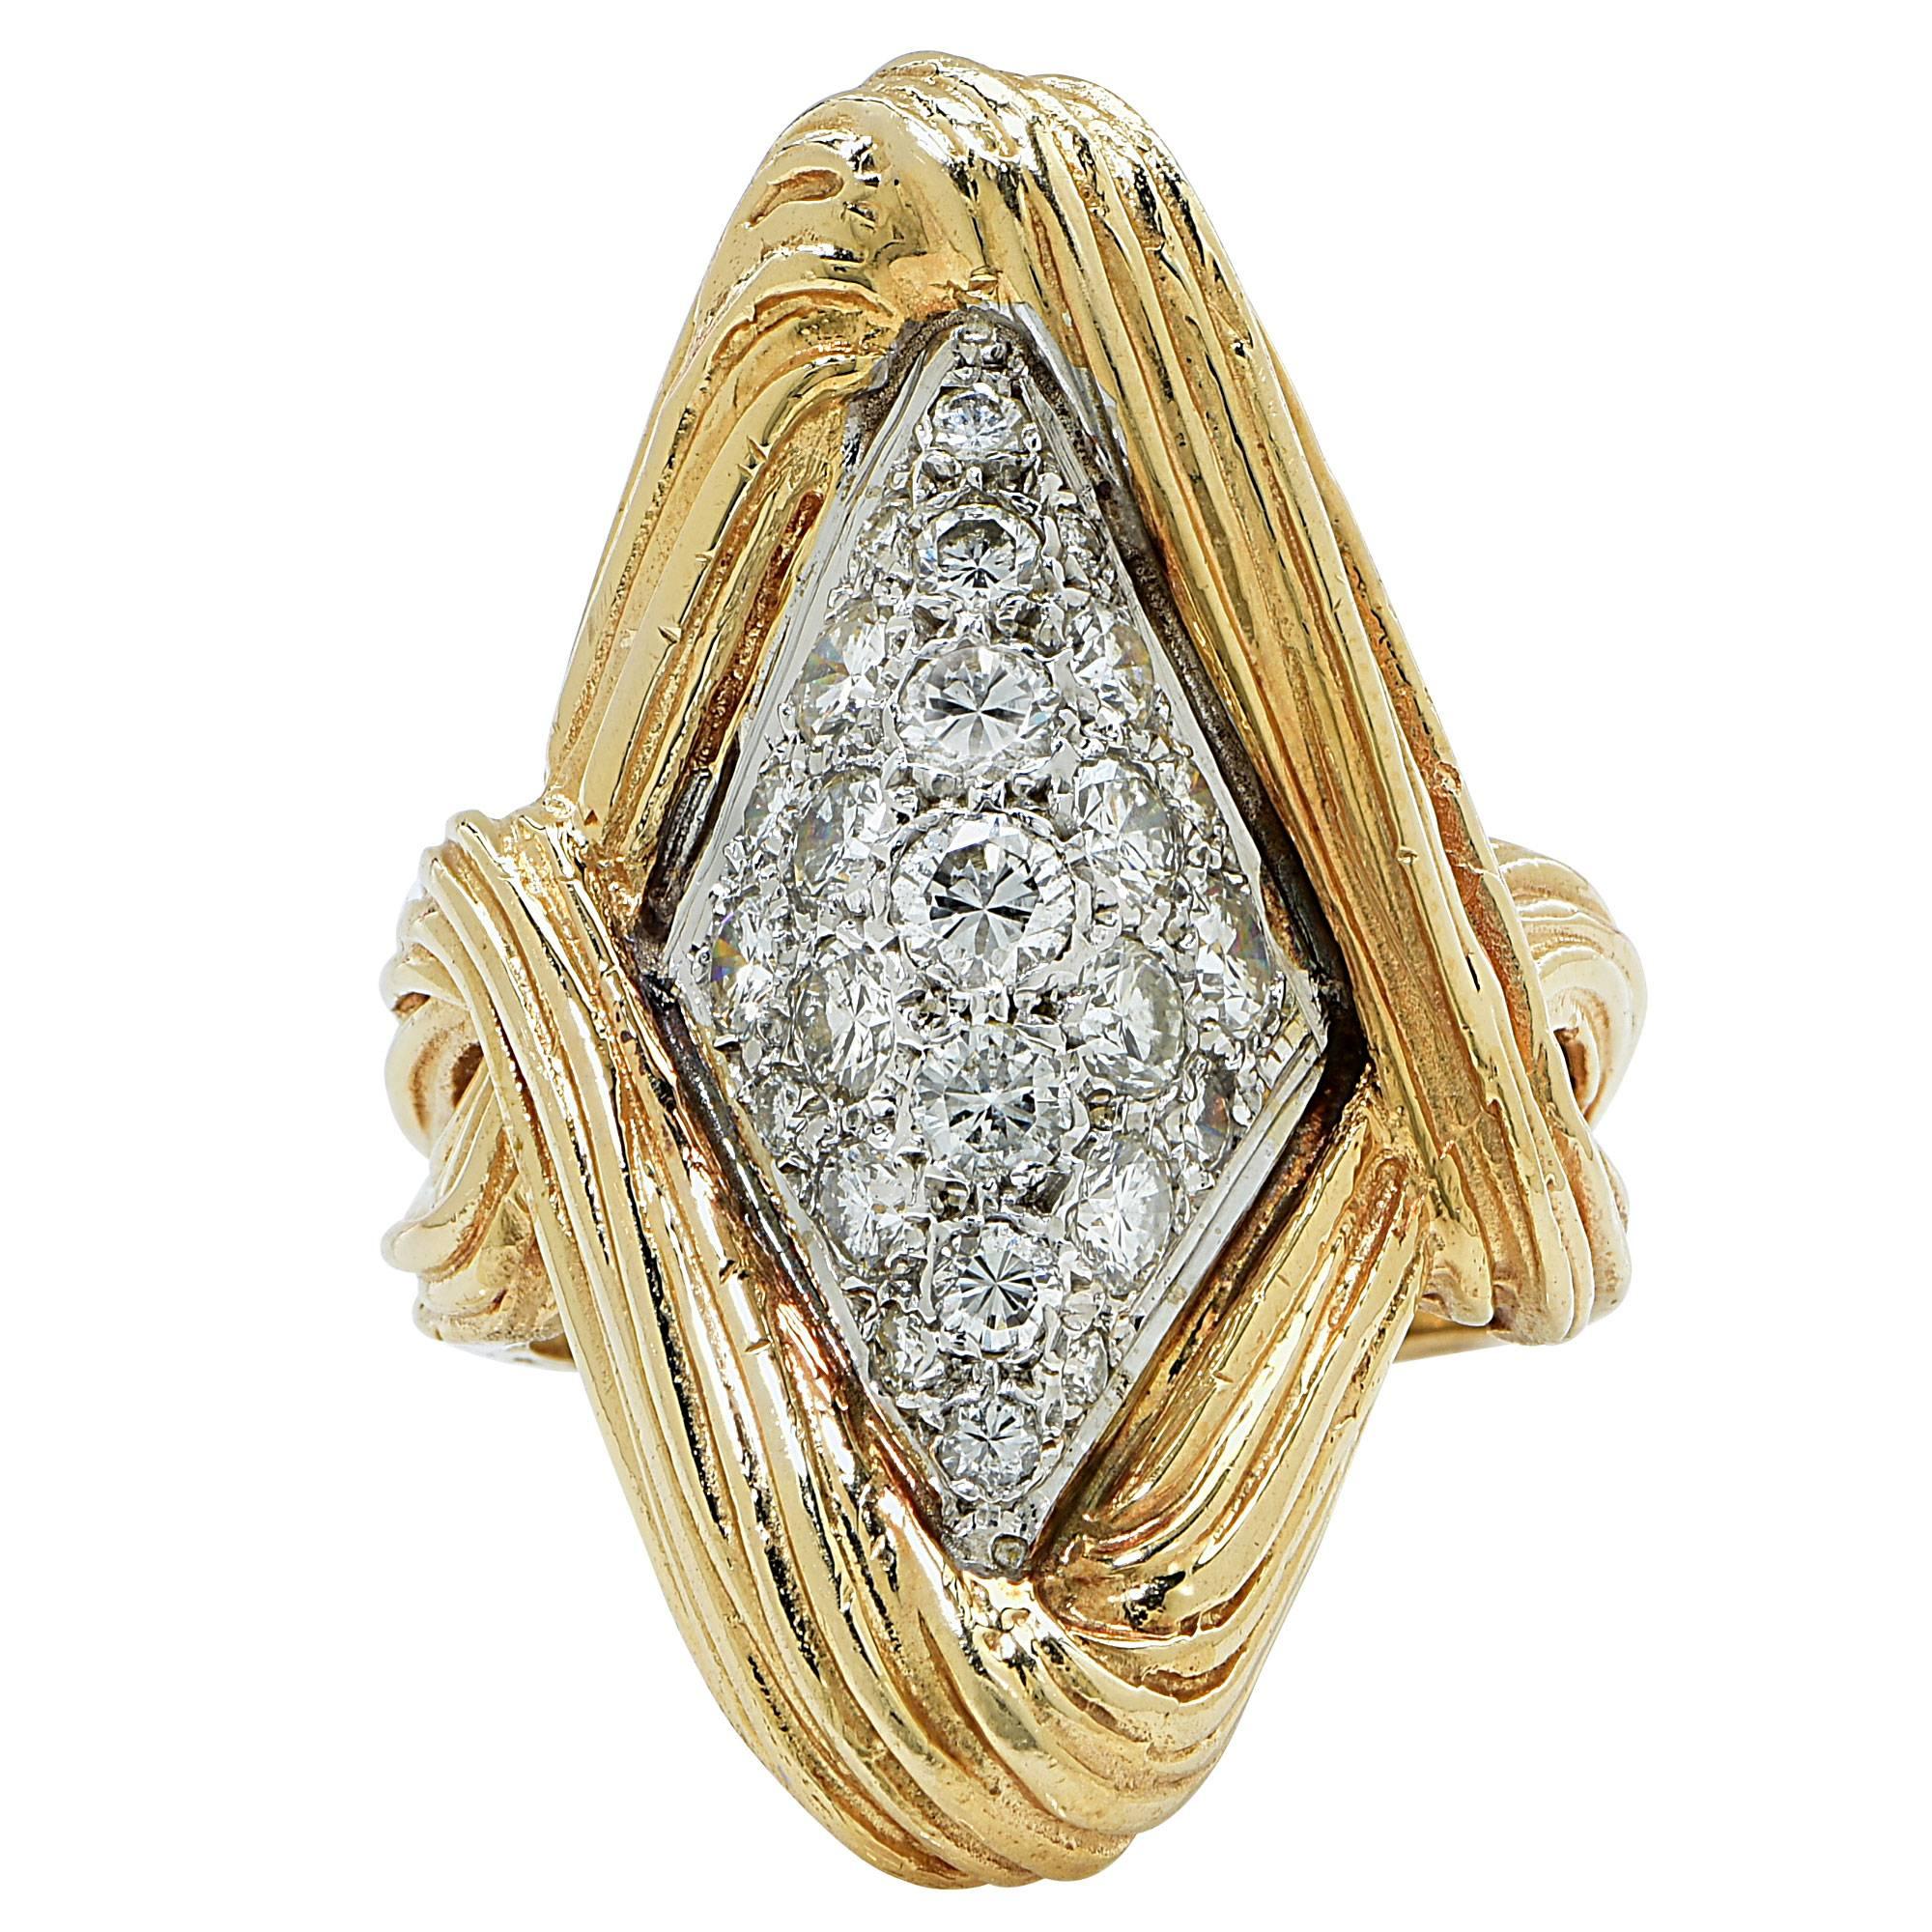 14k white and yellow gold ring featuring 28 round brilliant cut diamonds weighing approximately 2cts total, G color VS-SI clarity.

The ring is a size 6.75 and can be sized up or down.
It is stamped and tested as 14k gold.
The metal weight is